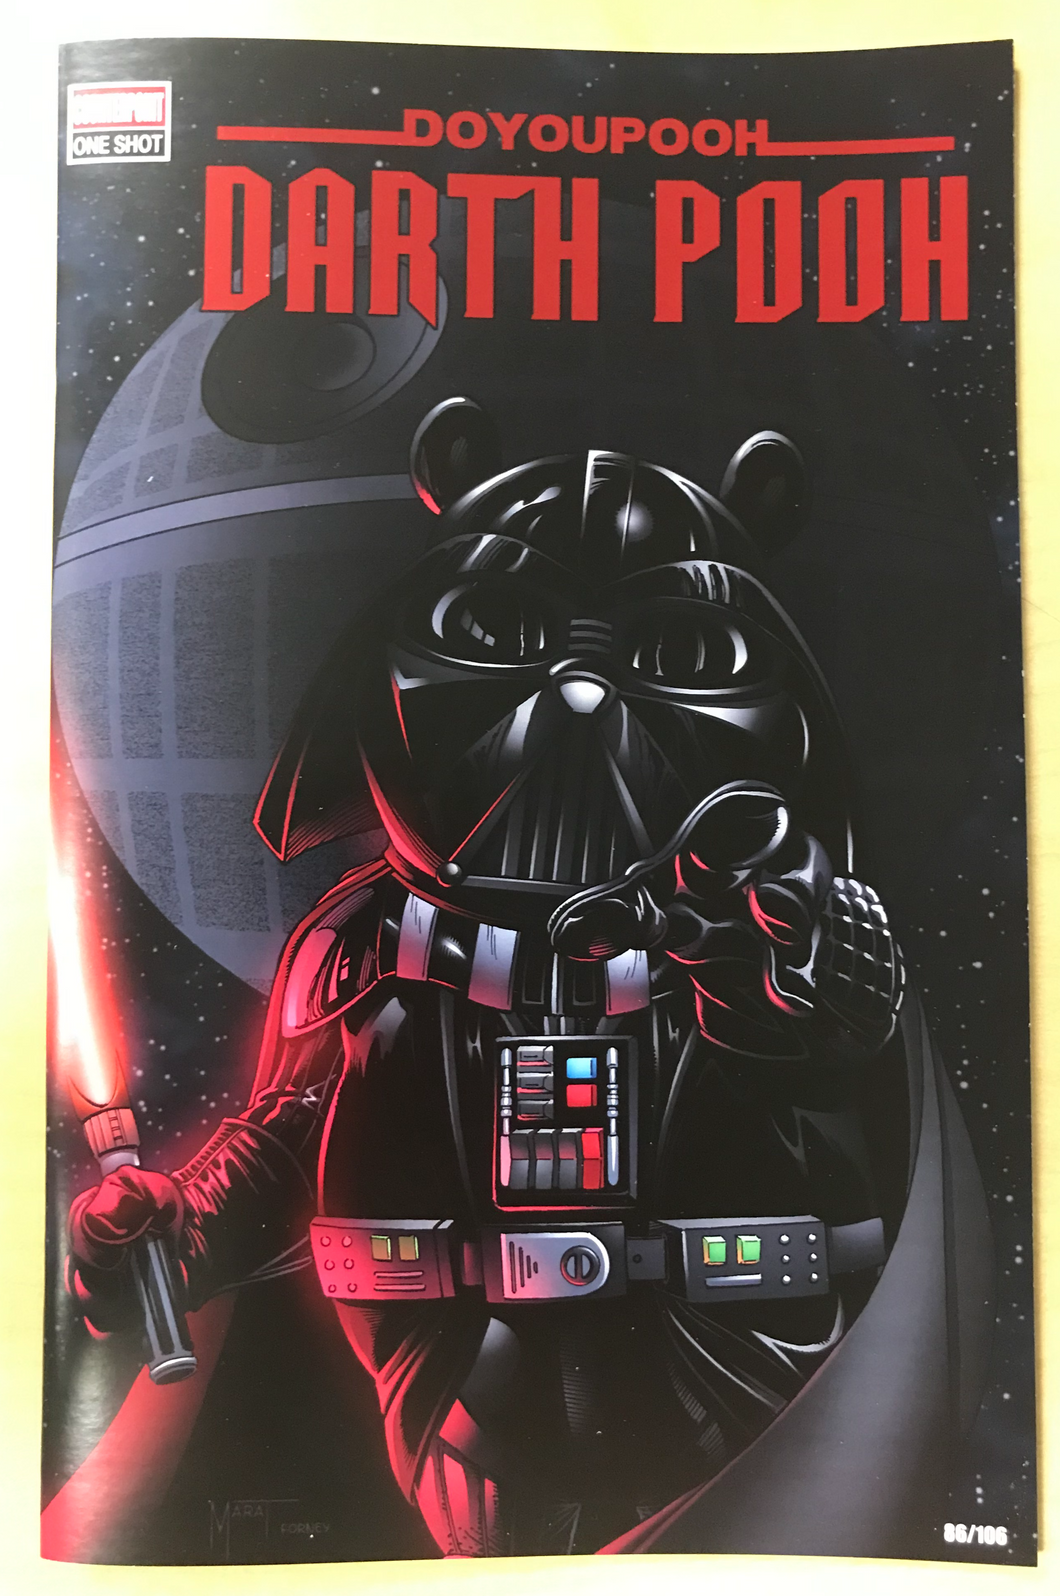 Do You Pooh? #1 Darth Pooh Star Wars Darth Vader Homage Variant Cover by Marat Mychaels & Sean Forney Limited to Only 106 Serial Numbered Copies!!!